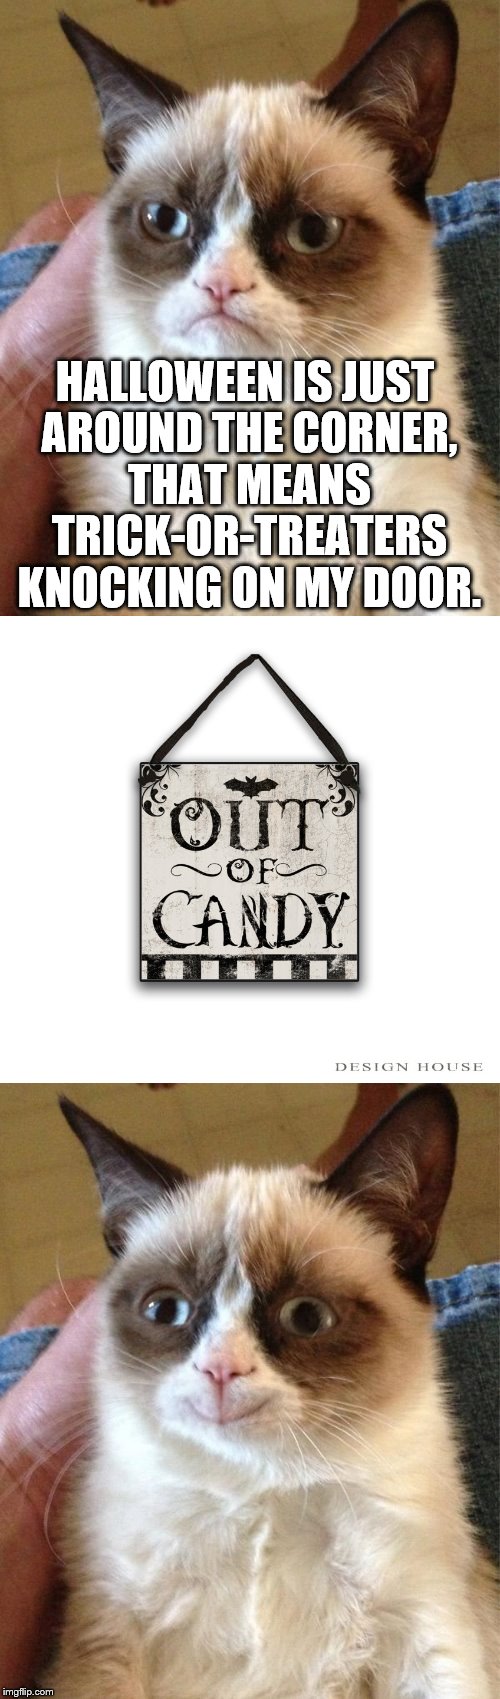 Grumpy cat at Halloween | HALLOWEEN IS JUST AROUND THE CORNER, THAT MEANS TRICK-OR-TREATERS KNOCKING ON MY DOOR. | image tagged in grumpy cat,sign,grumpy cat happy | made w/ Imgflip meme maker